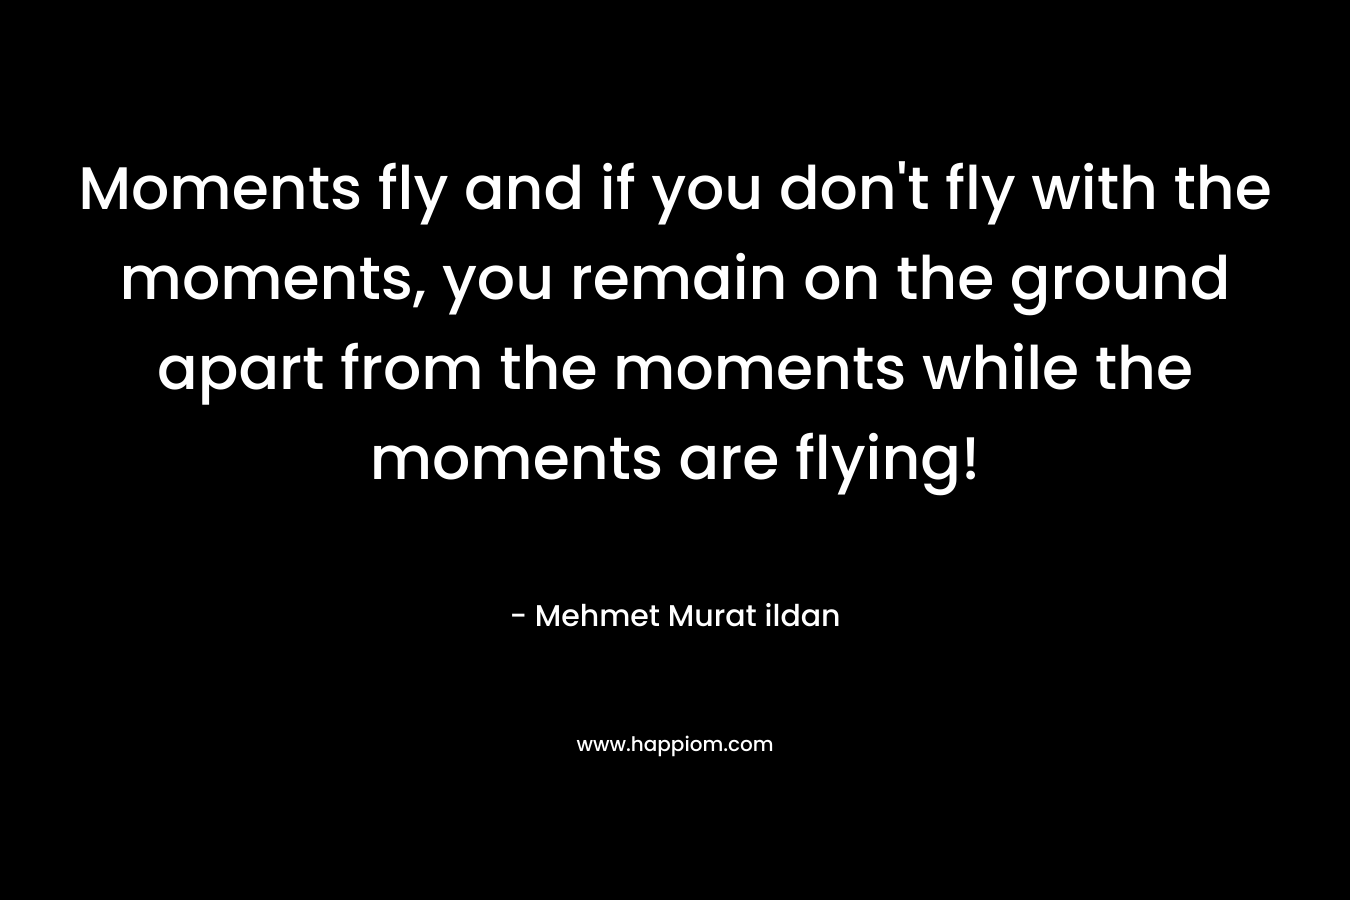 Moments fly and if you don't fly with the moments, you remain on the ground apart from the moments while the moments are flying!